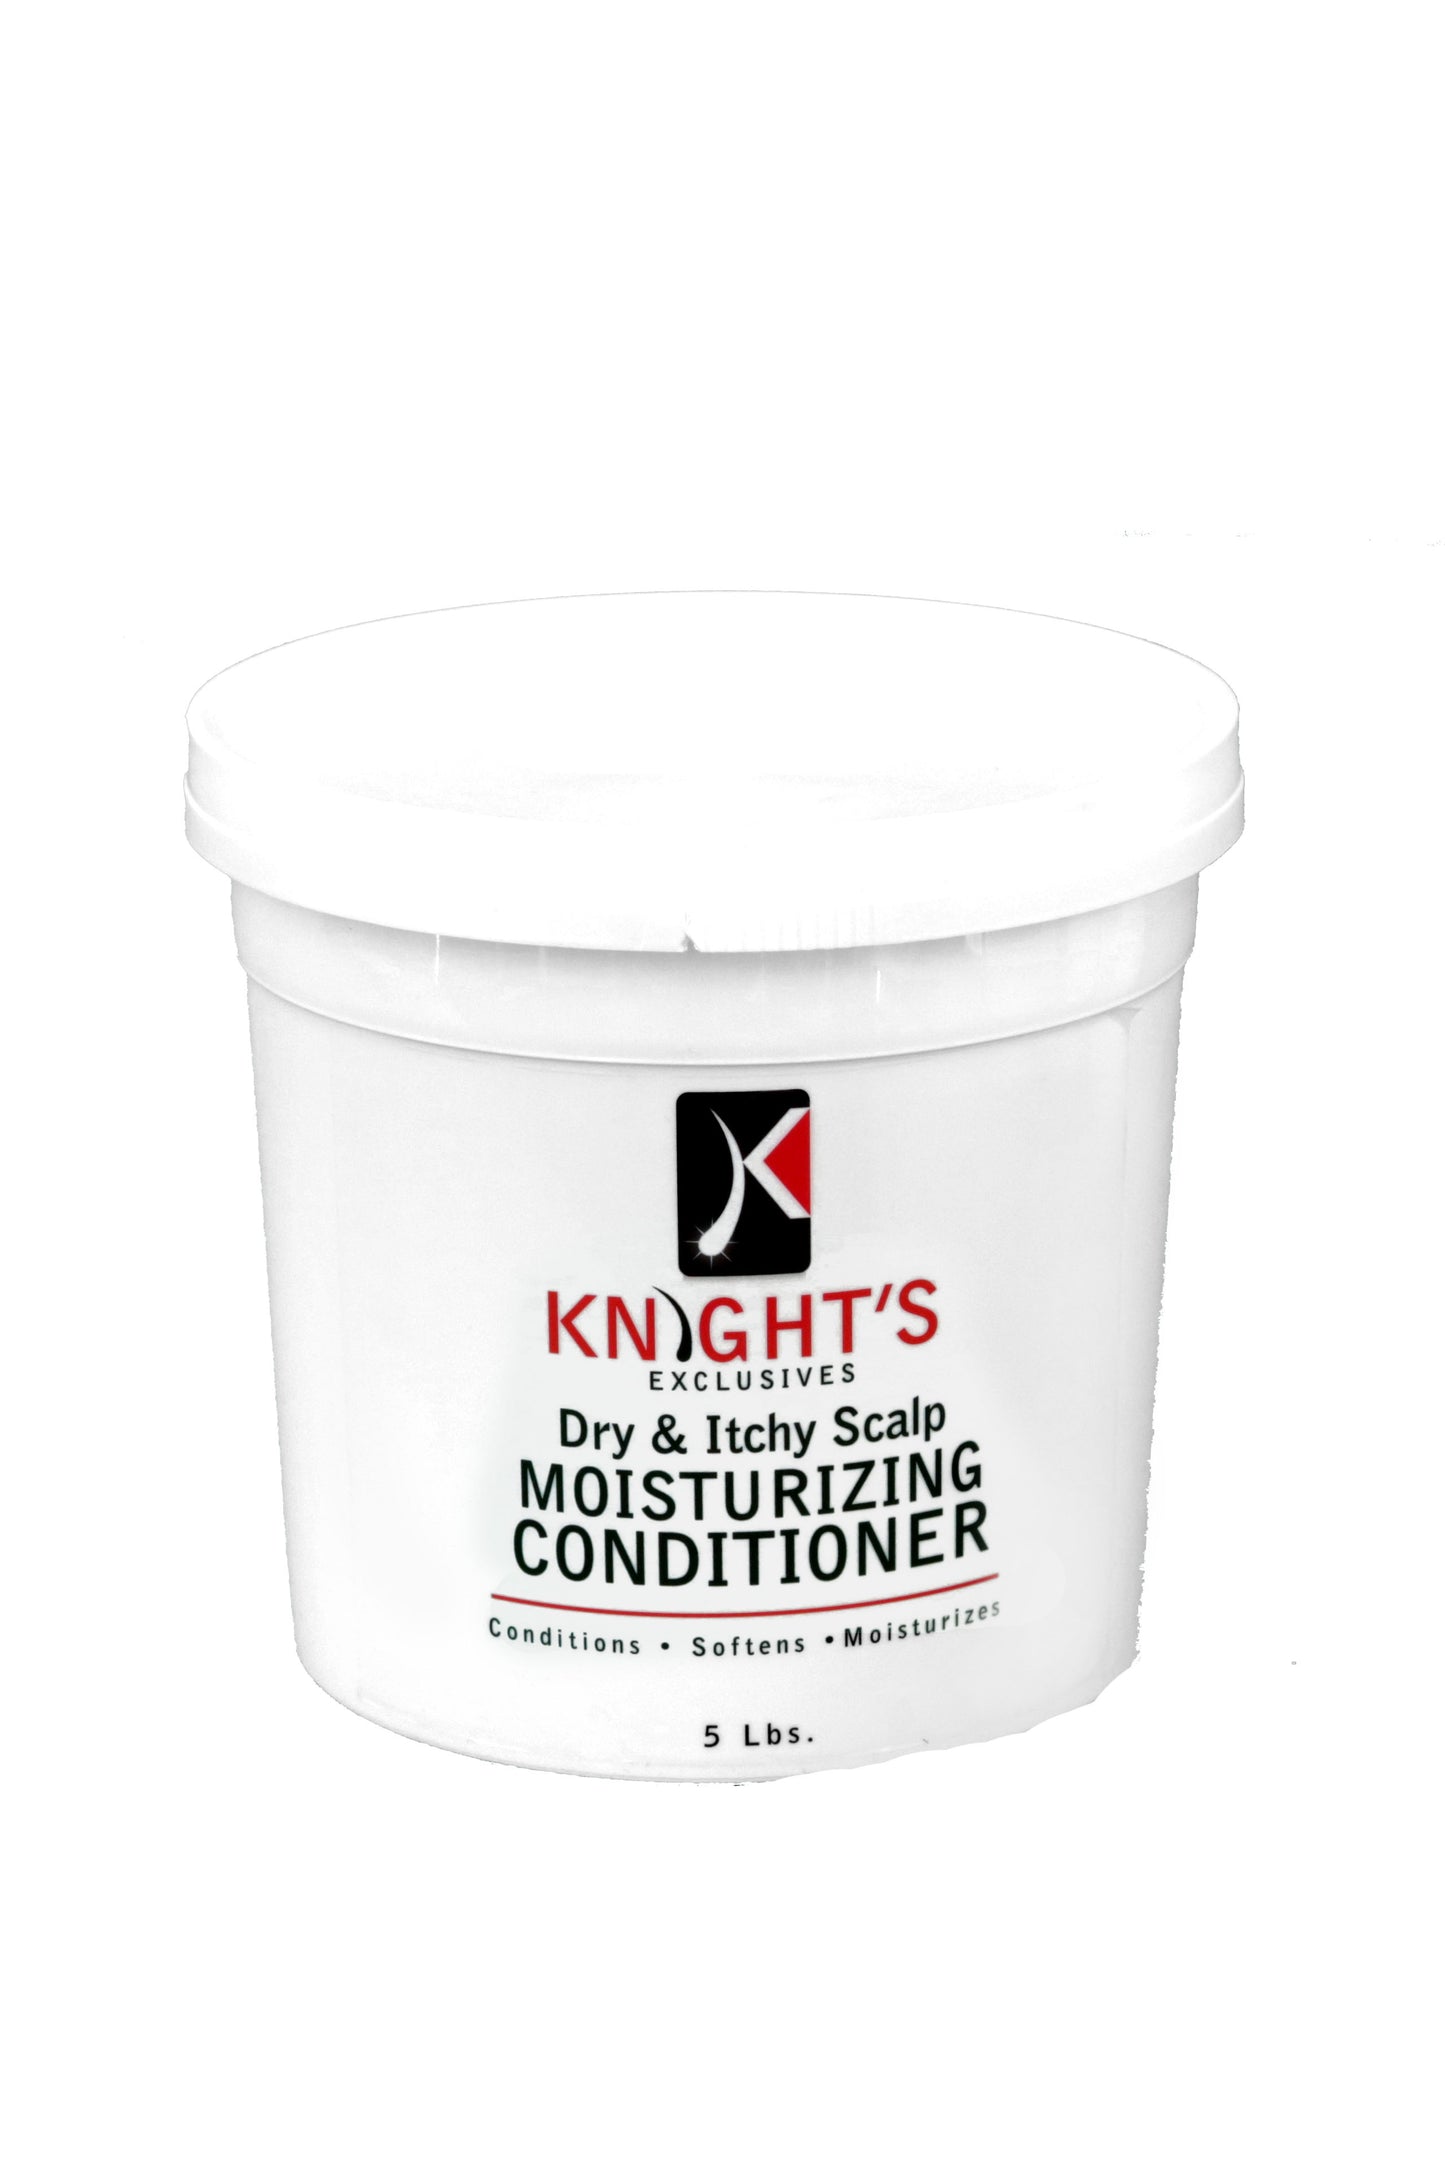 Knights Exclusives Dry & Itchy Scalp Moisturizing Conditioner